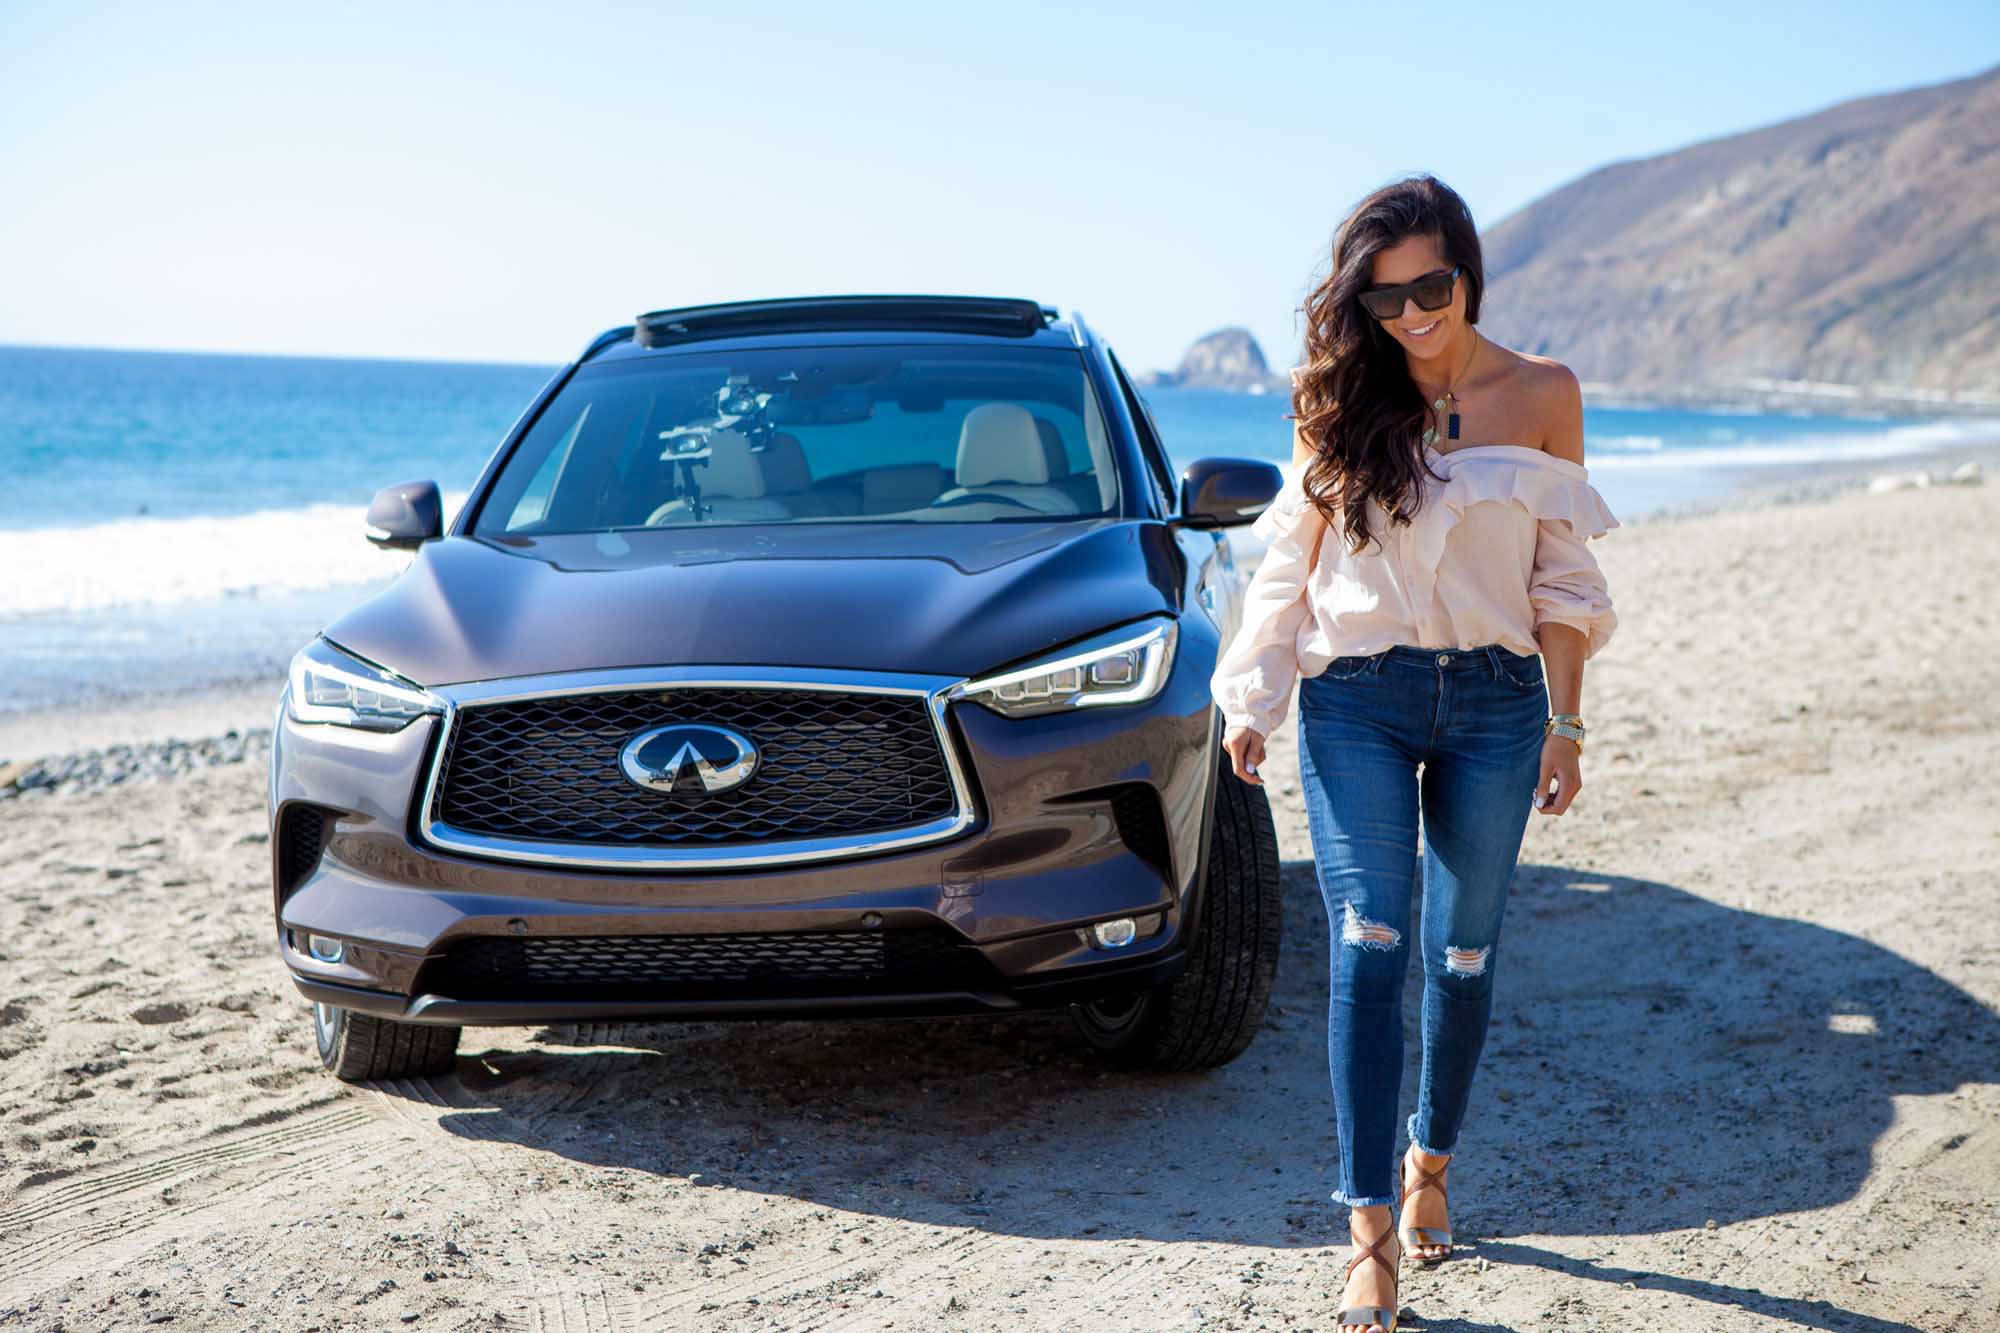 Emily Ann Gemma(@emilyanngemma) - Fashion Photography and Car Photography, driving and in front of new Infiniti QX50